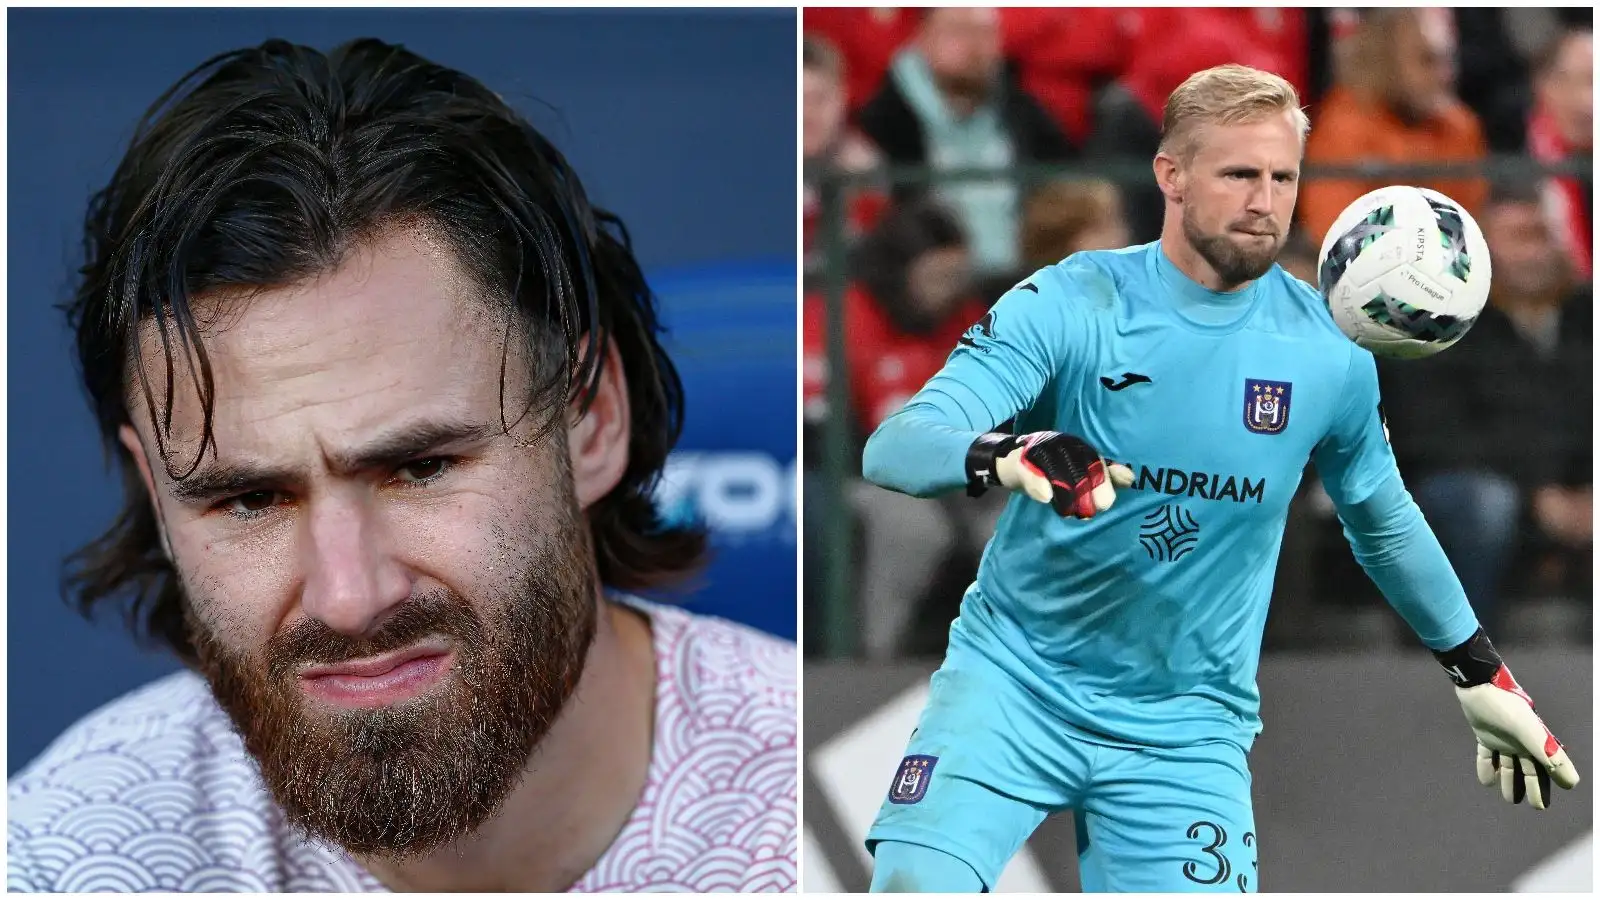 Ben Brereton-Diaz and Kasper Schmeichel can both join Sheffield Joined this summer season.